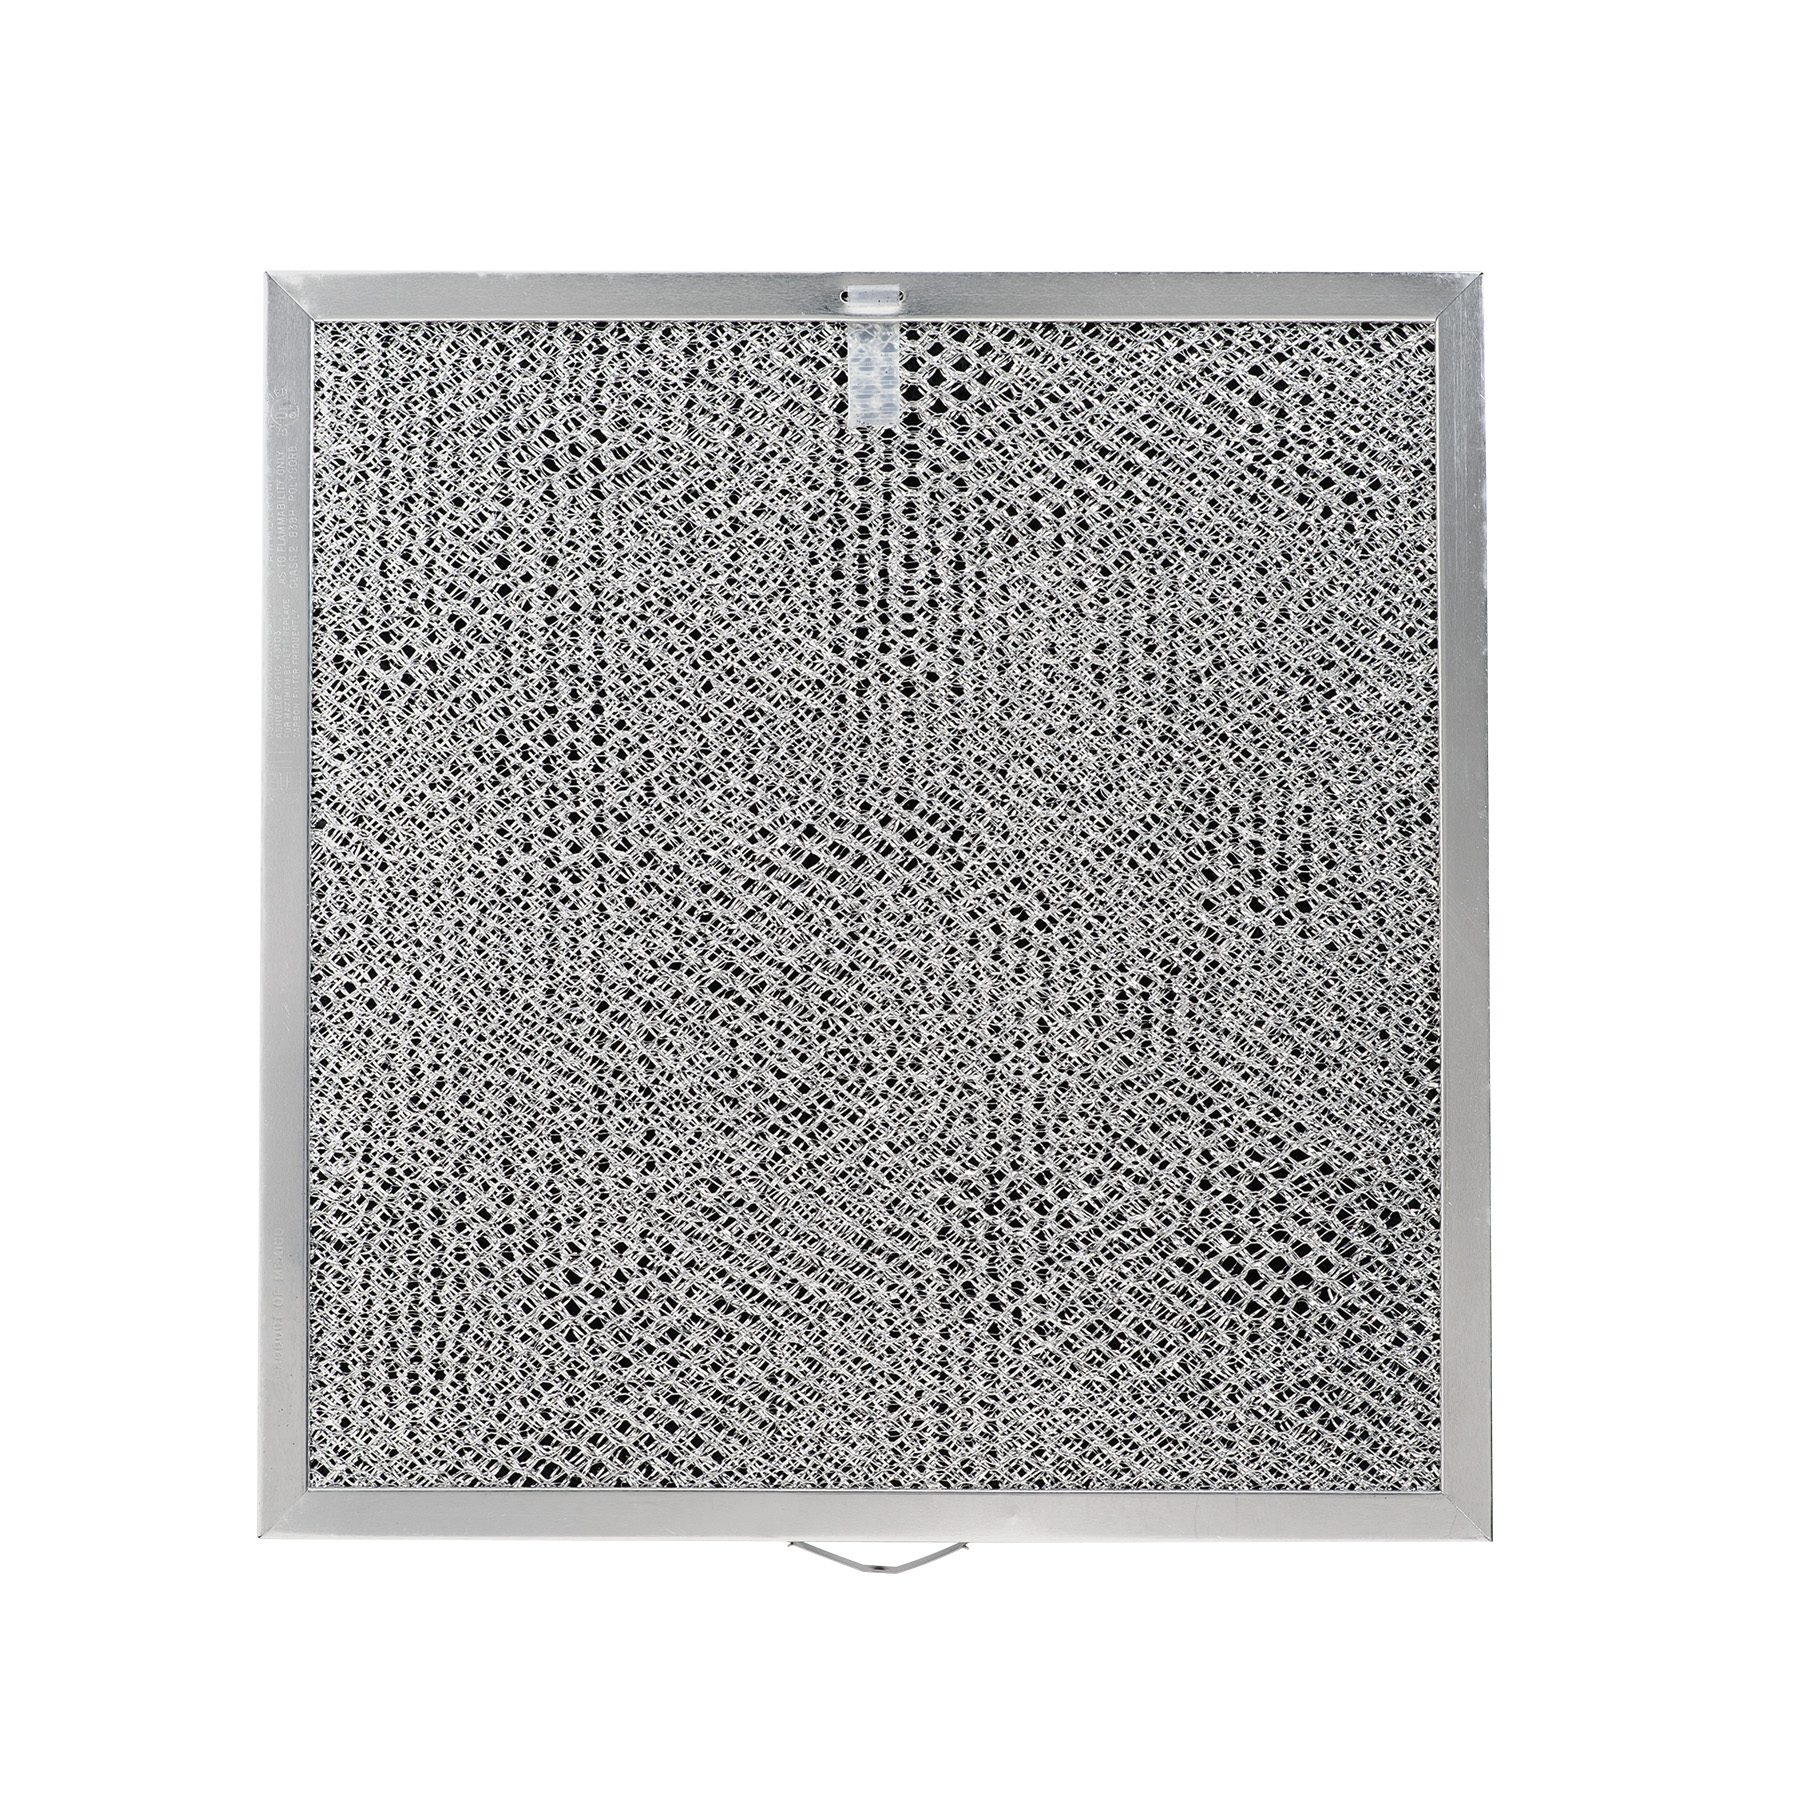 Broan-NuTone BPQTF Non-Ducted Charcoal Replacement Filter for QT20000 Range Hoods Grey 1